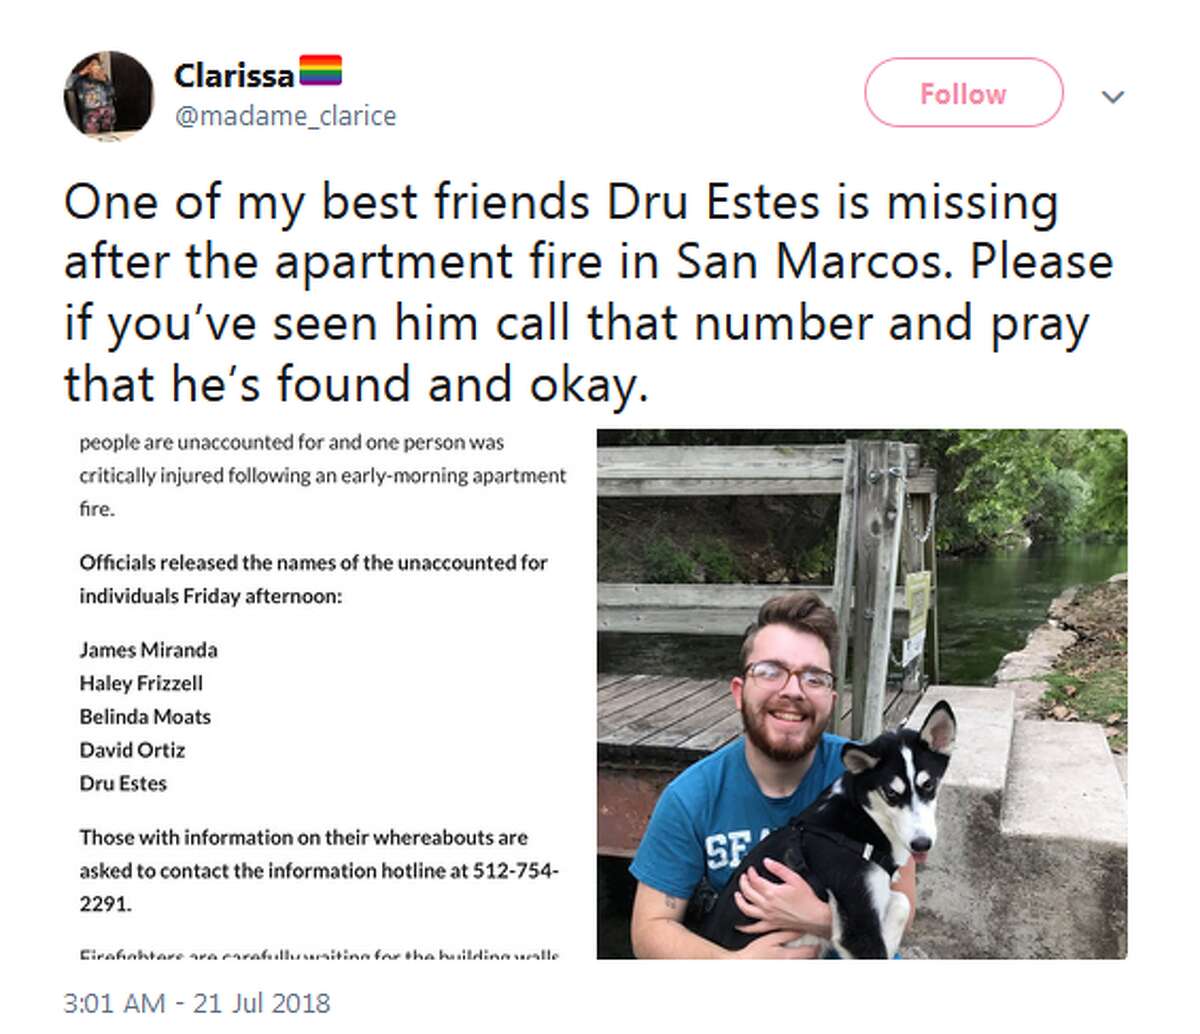 @madame_clarice: One of my best friends Dru Estes is missing after the apartment fire in San Marcos. Please if you’ve seen him call that number and pray that he’s found and okay.